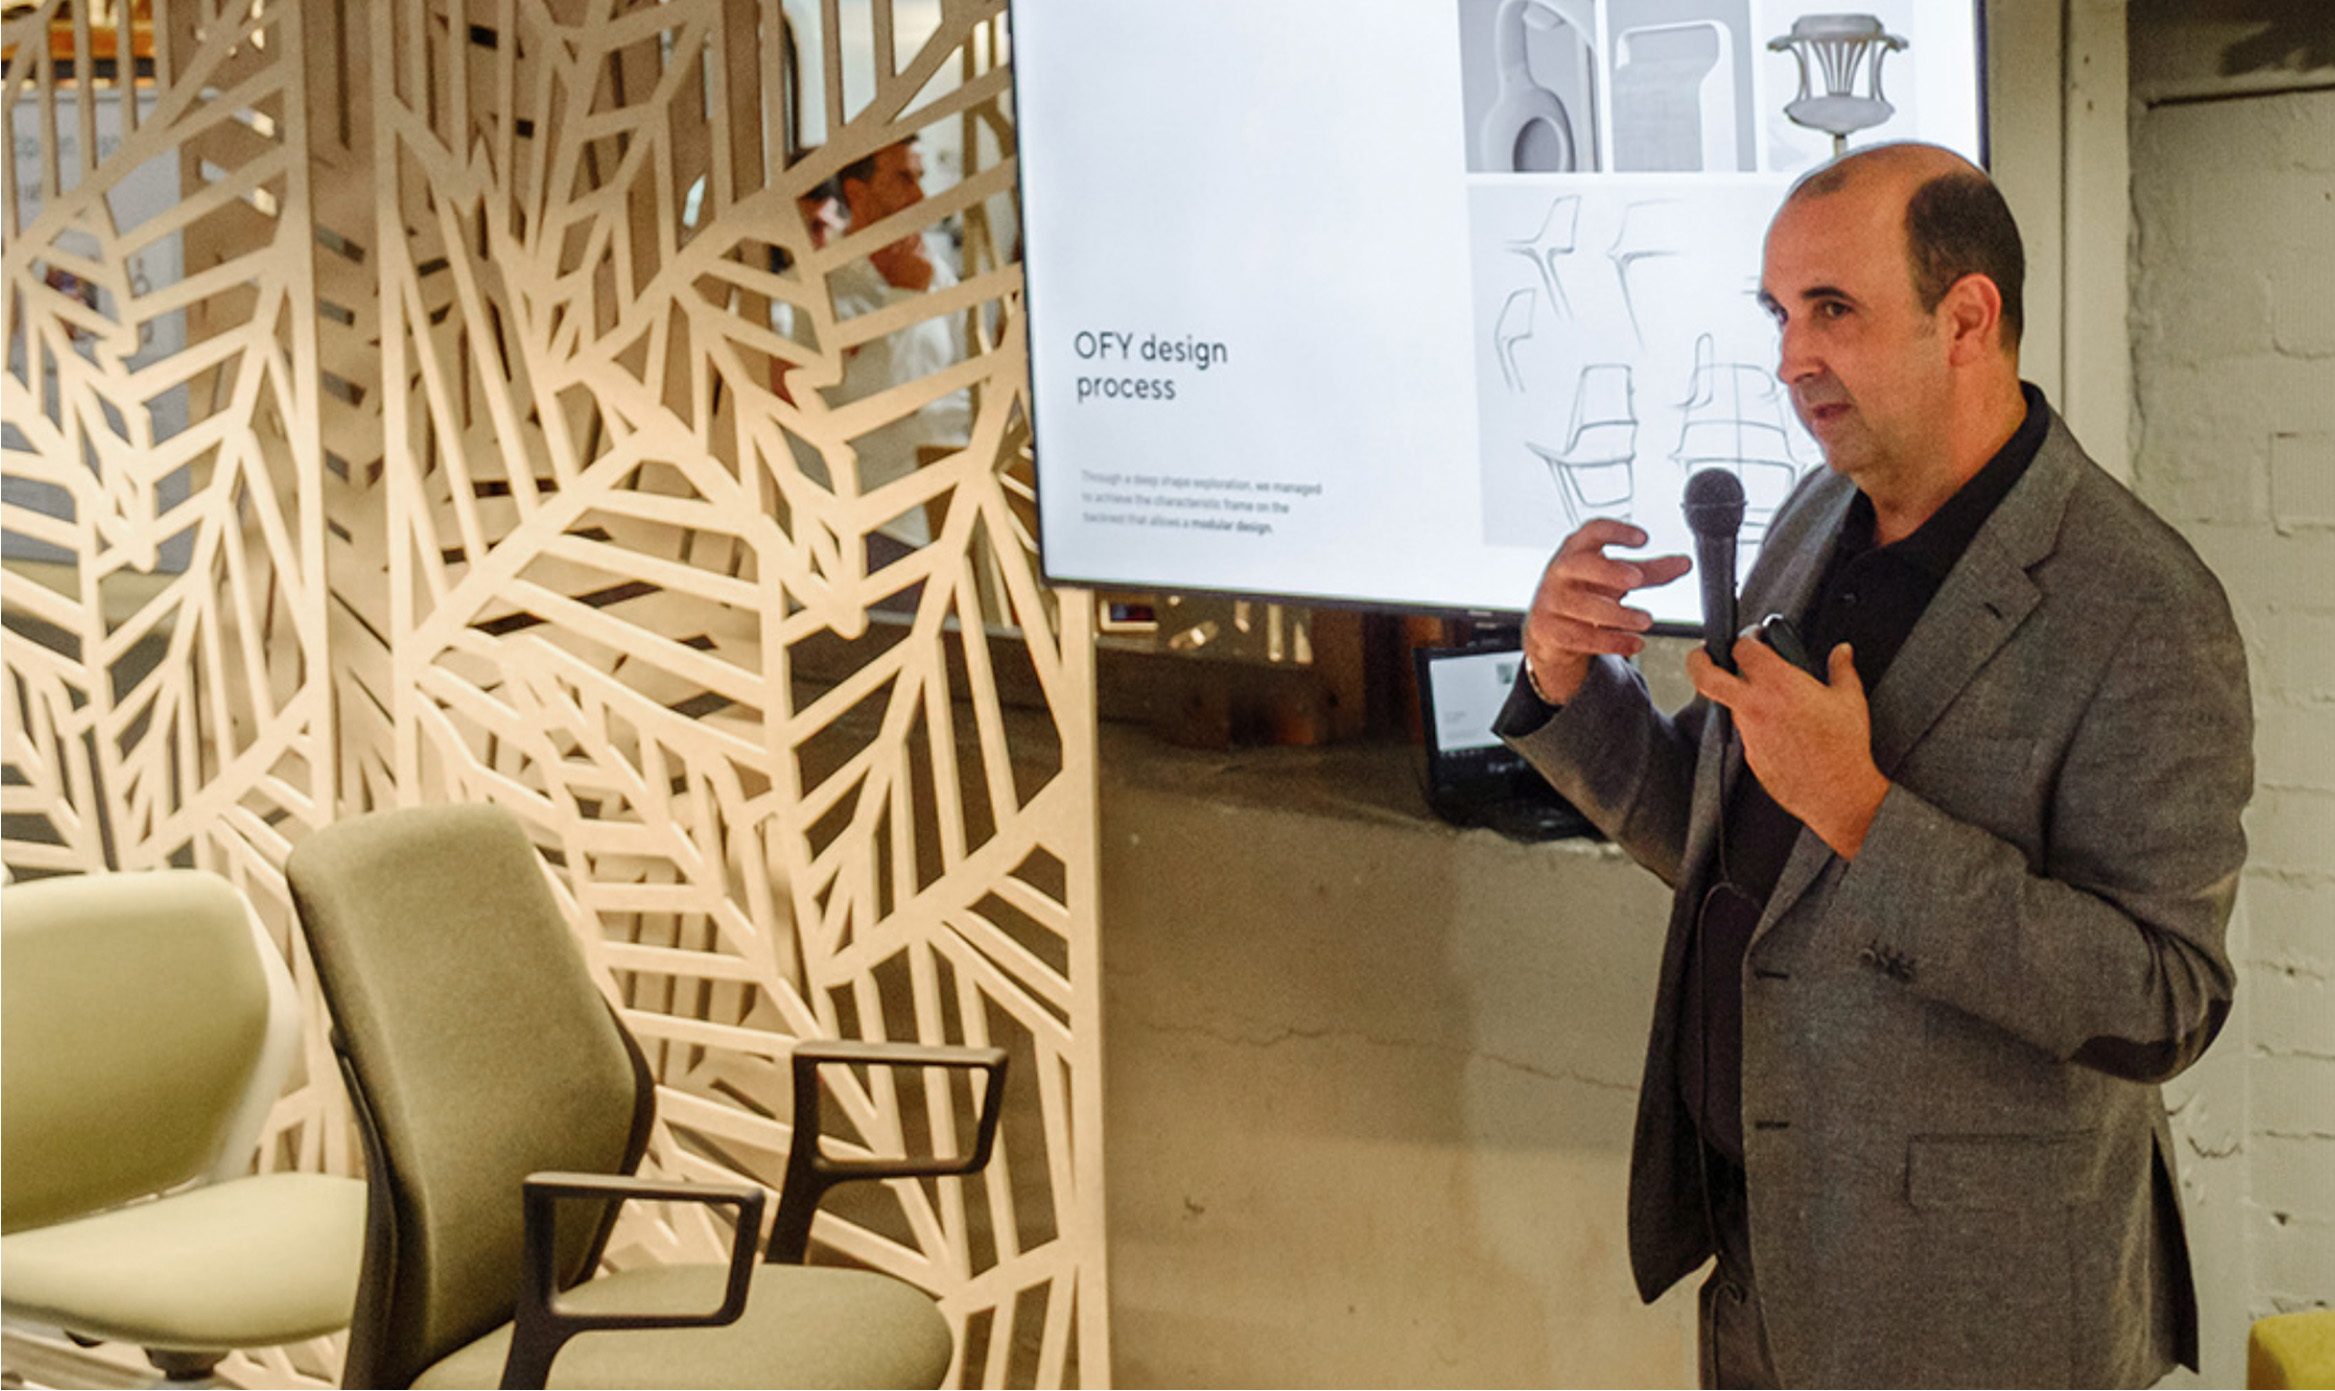 Marcelo Alegre, CEO of Alegre Design, presenting the OFY chair designed for Narbutas. The event highlights the chair's ergonomic design, thermoplastic backrests, and adjustable lumbar support, tailored for modern and hybrid workspaces.